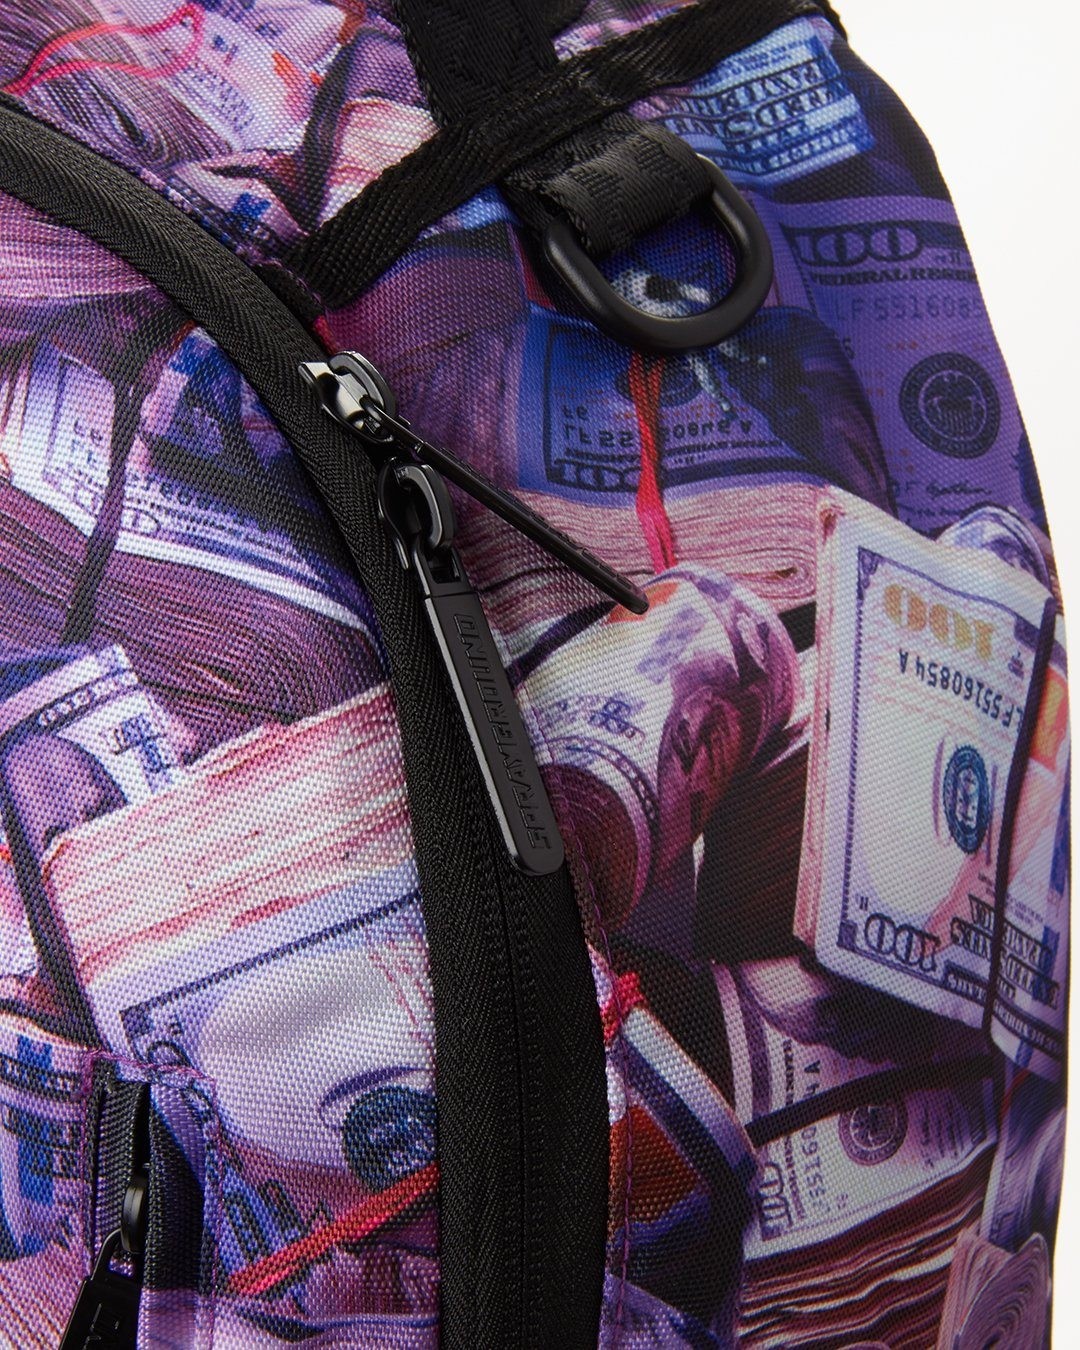 Discount | Spaced Out Backpack Sprayground Sale - Discount | Spaced Out Backpack Sprayground Sale-01-5